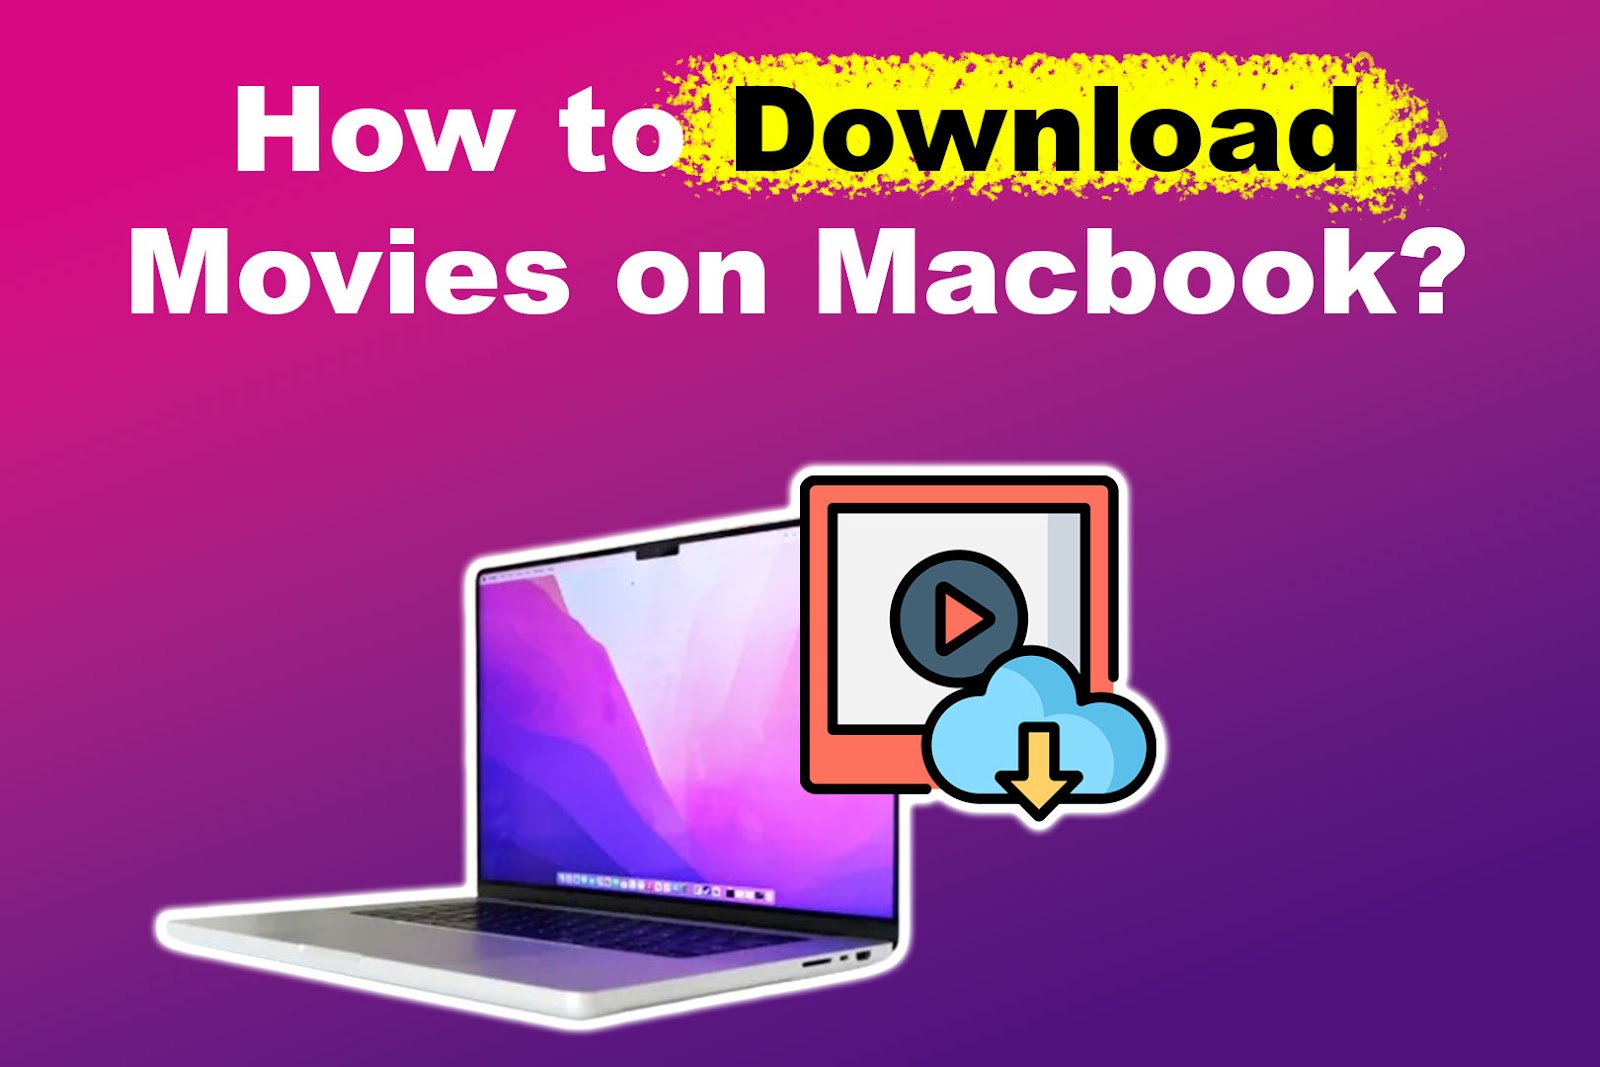 How to Download Movies on Macbook